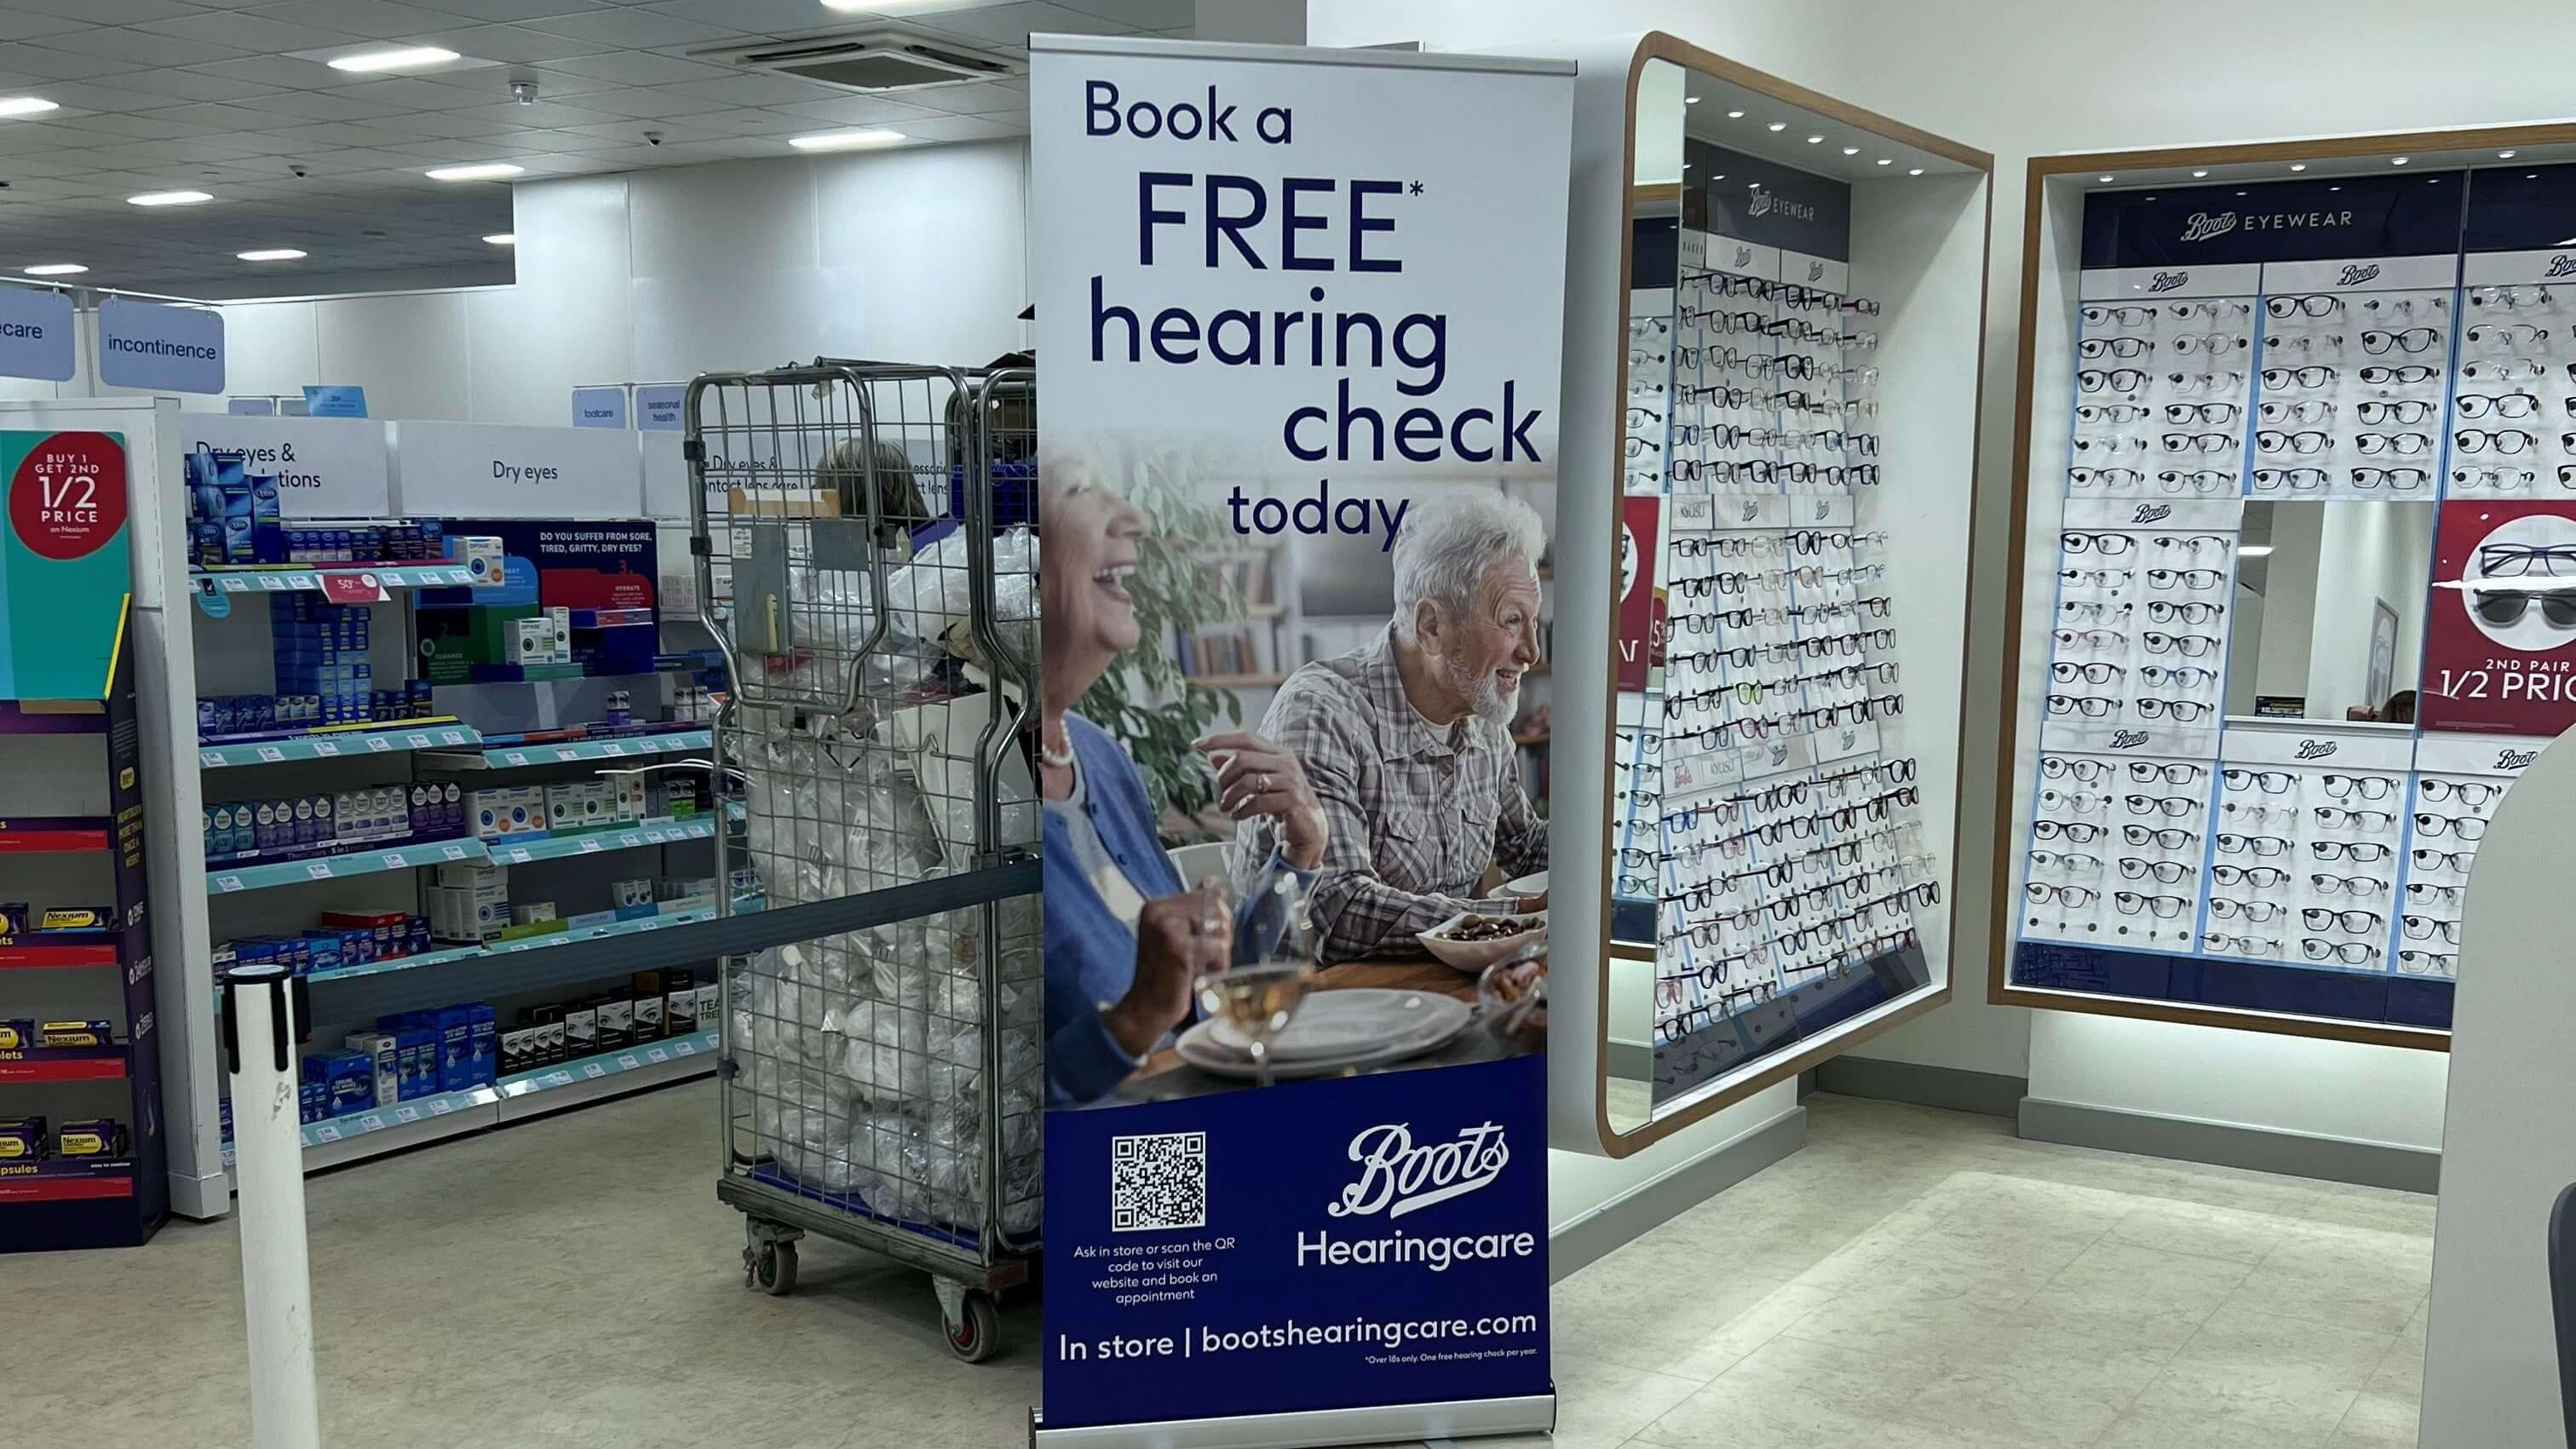 Images Boots Hearingcare Holme